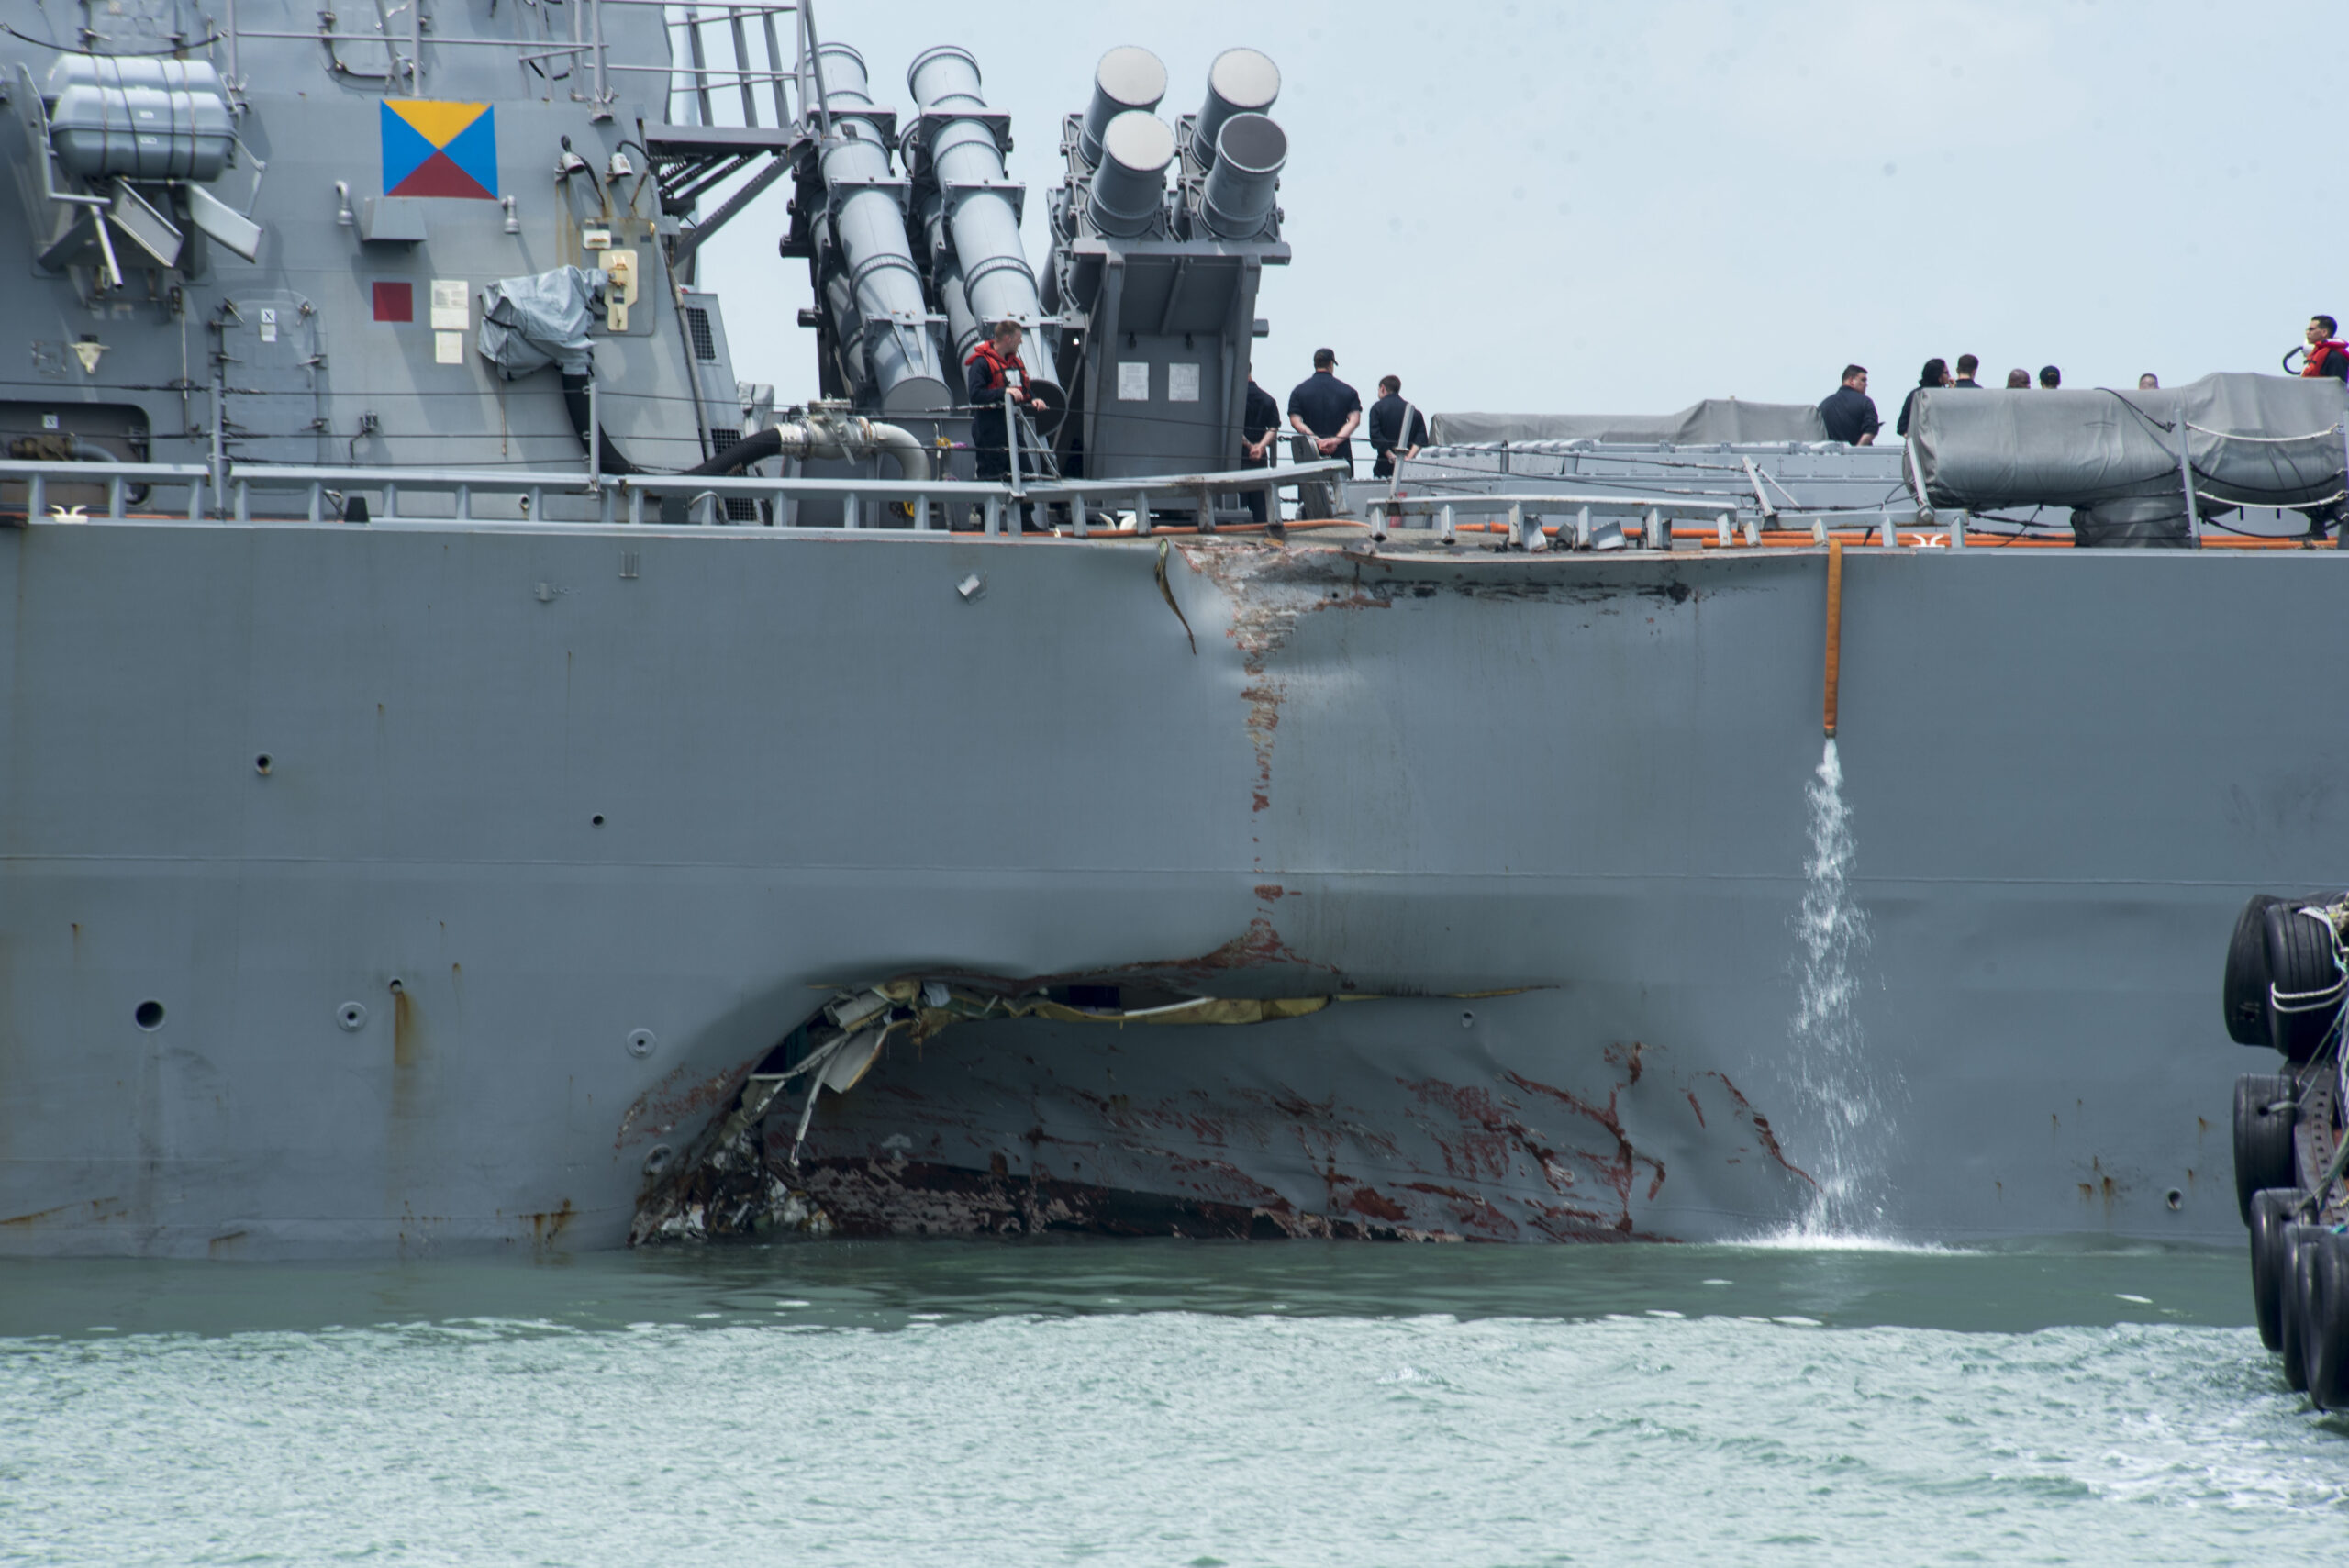 Was The Merchant Ship Hacked? McCain Collision Is First Run For Navy Cyber Investigators